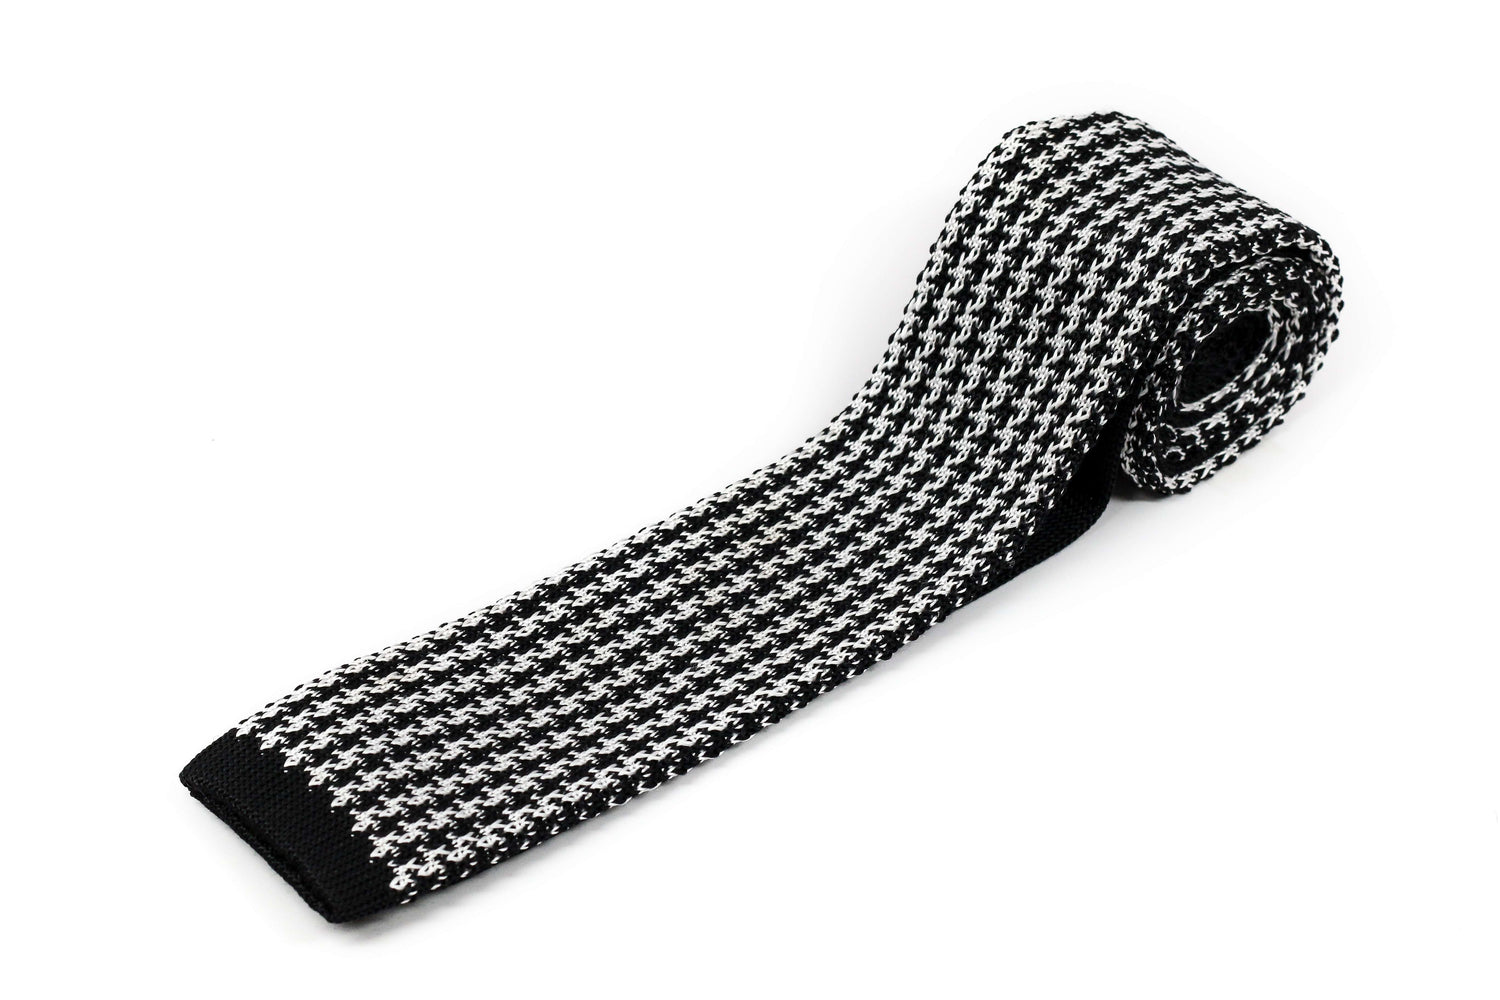 100% Silk XL Skinny Patterned Knit Tie for Big and Tall Men